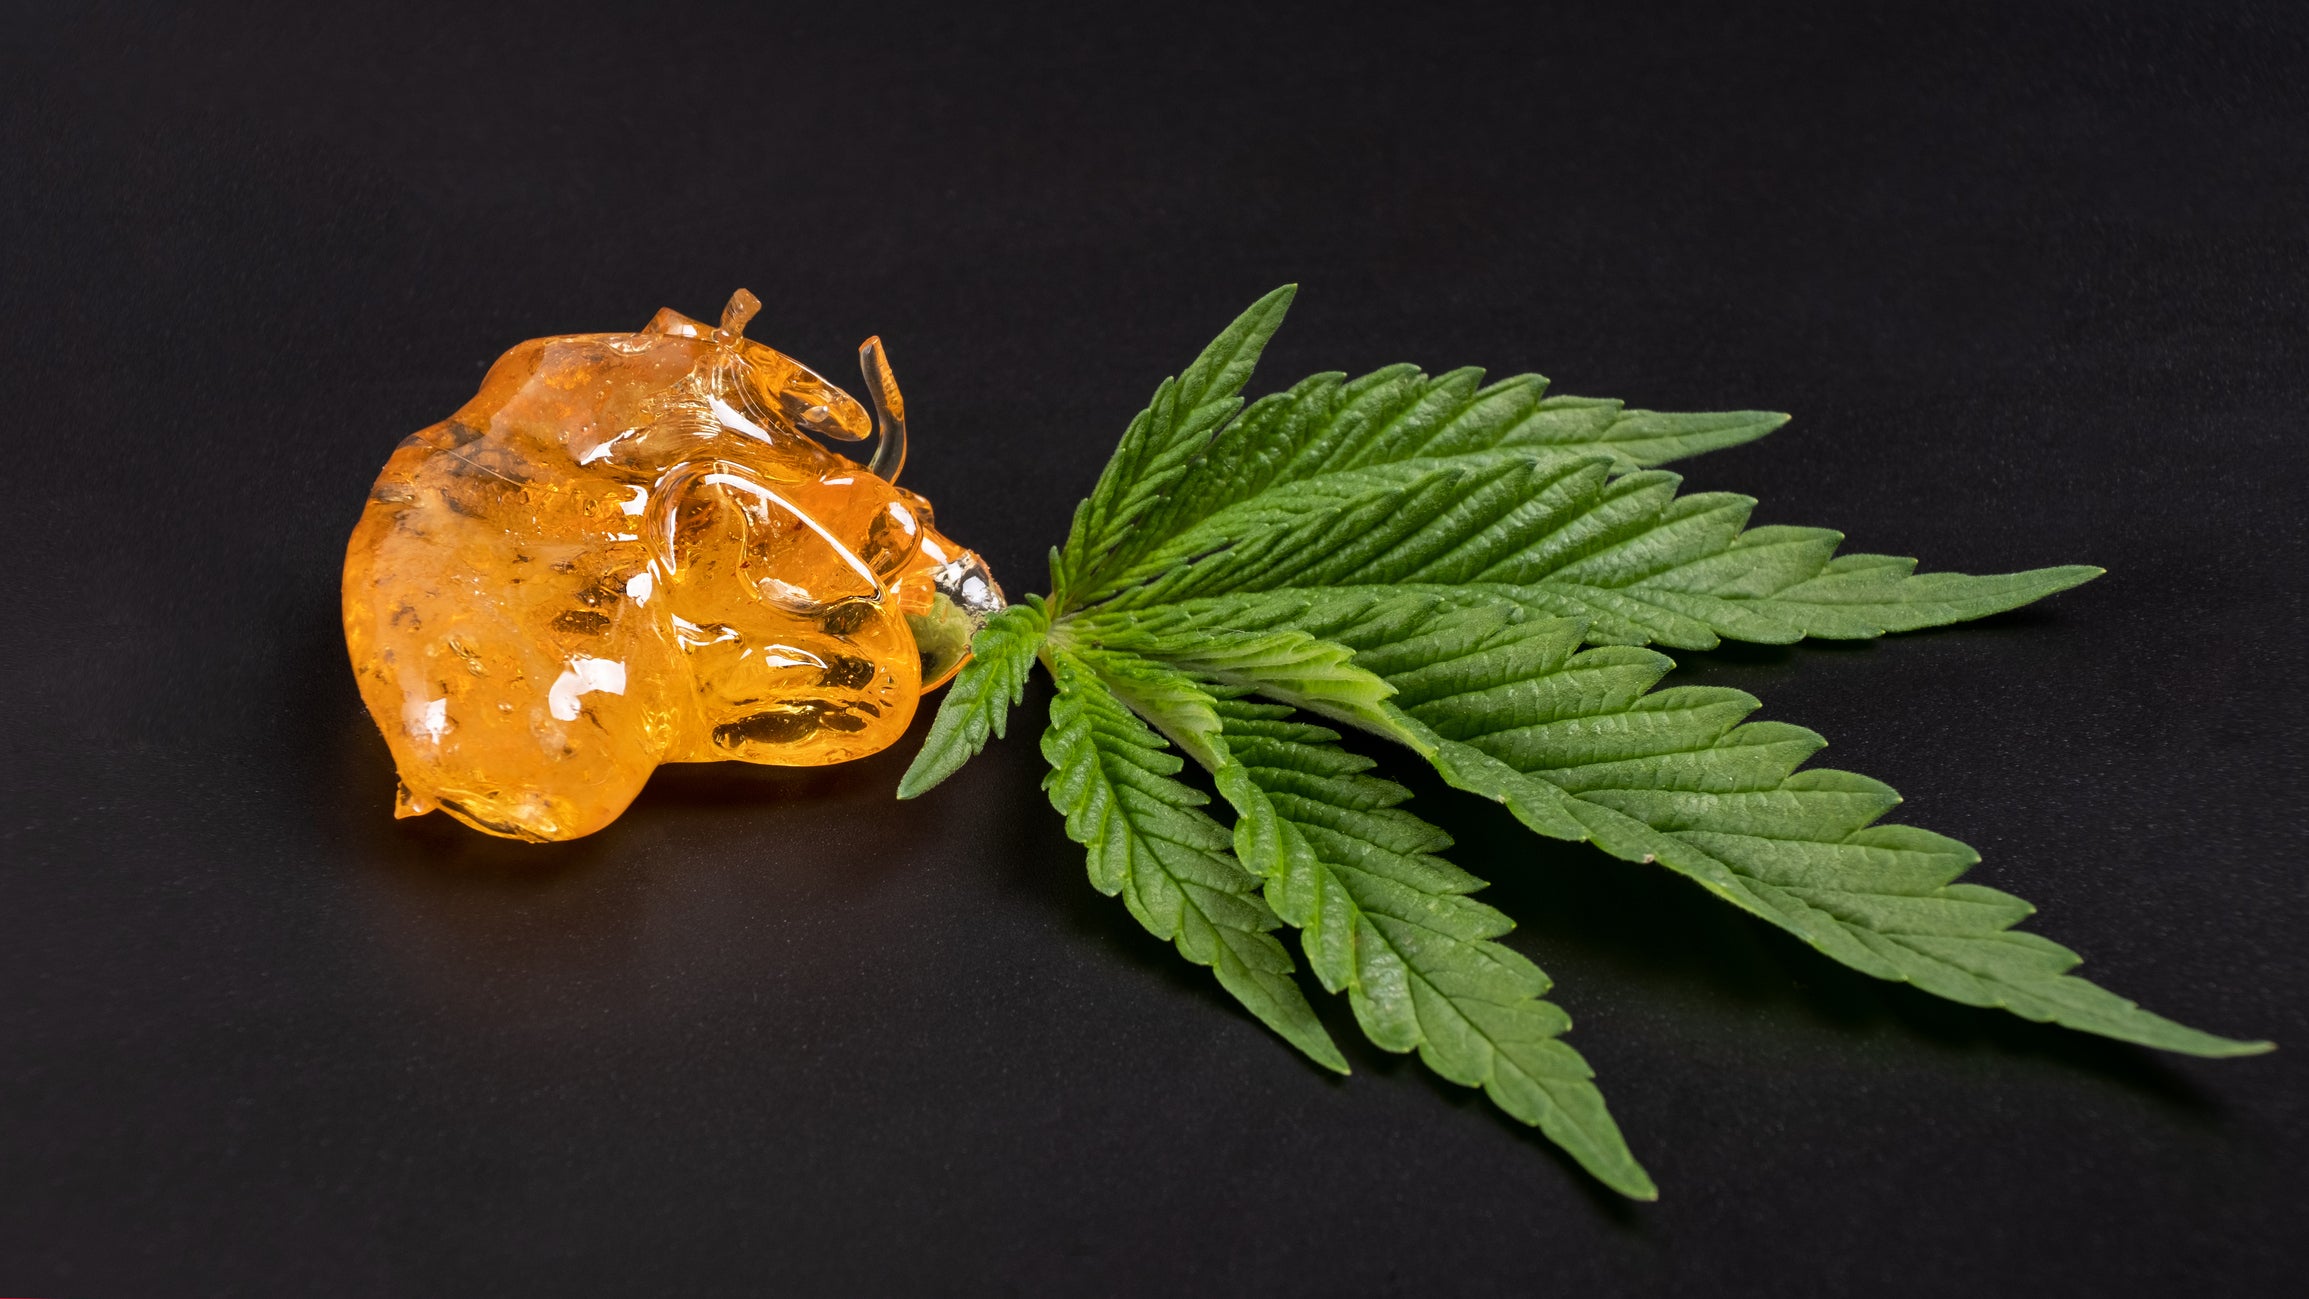 An amber-hued glob of cannabis extract sits side by side with a cannabis flower leaf on a black surface.